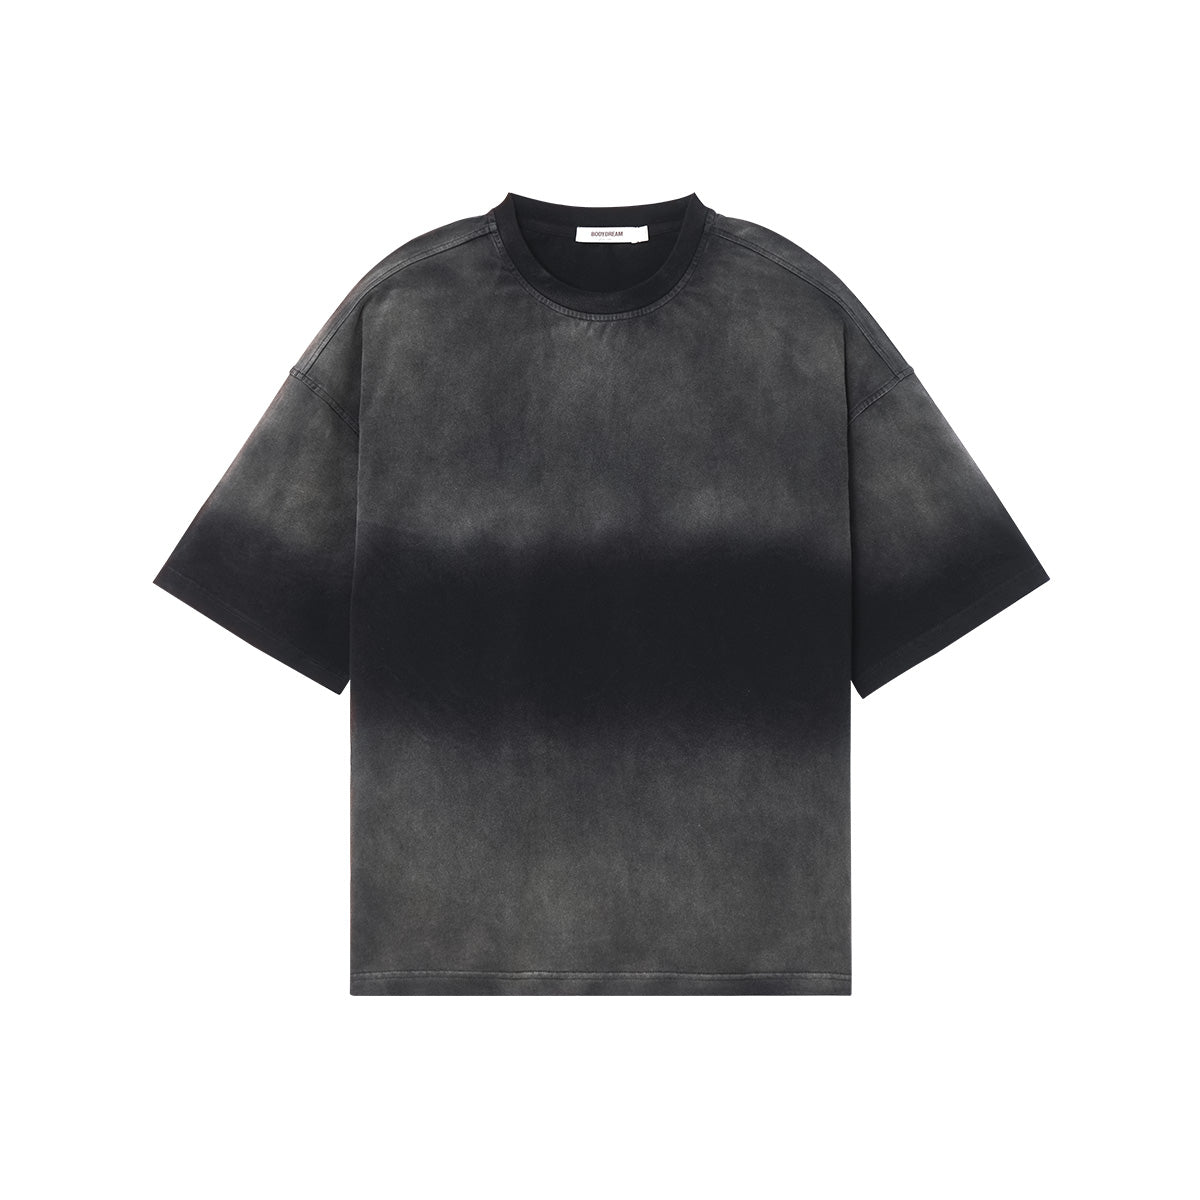 Distressed-effect Gradient Oversized?Charcoal Tee